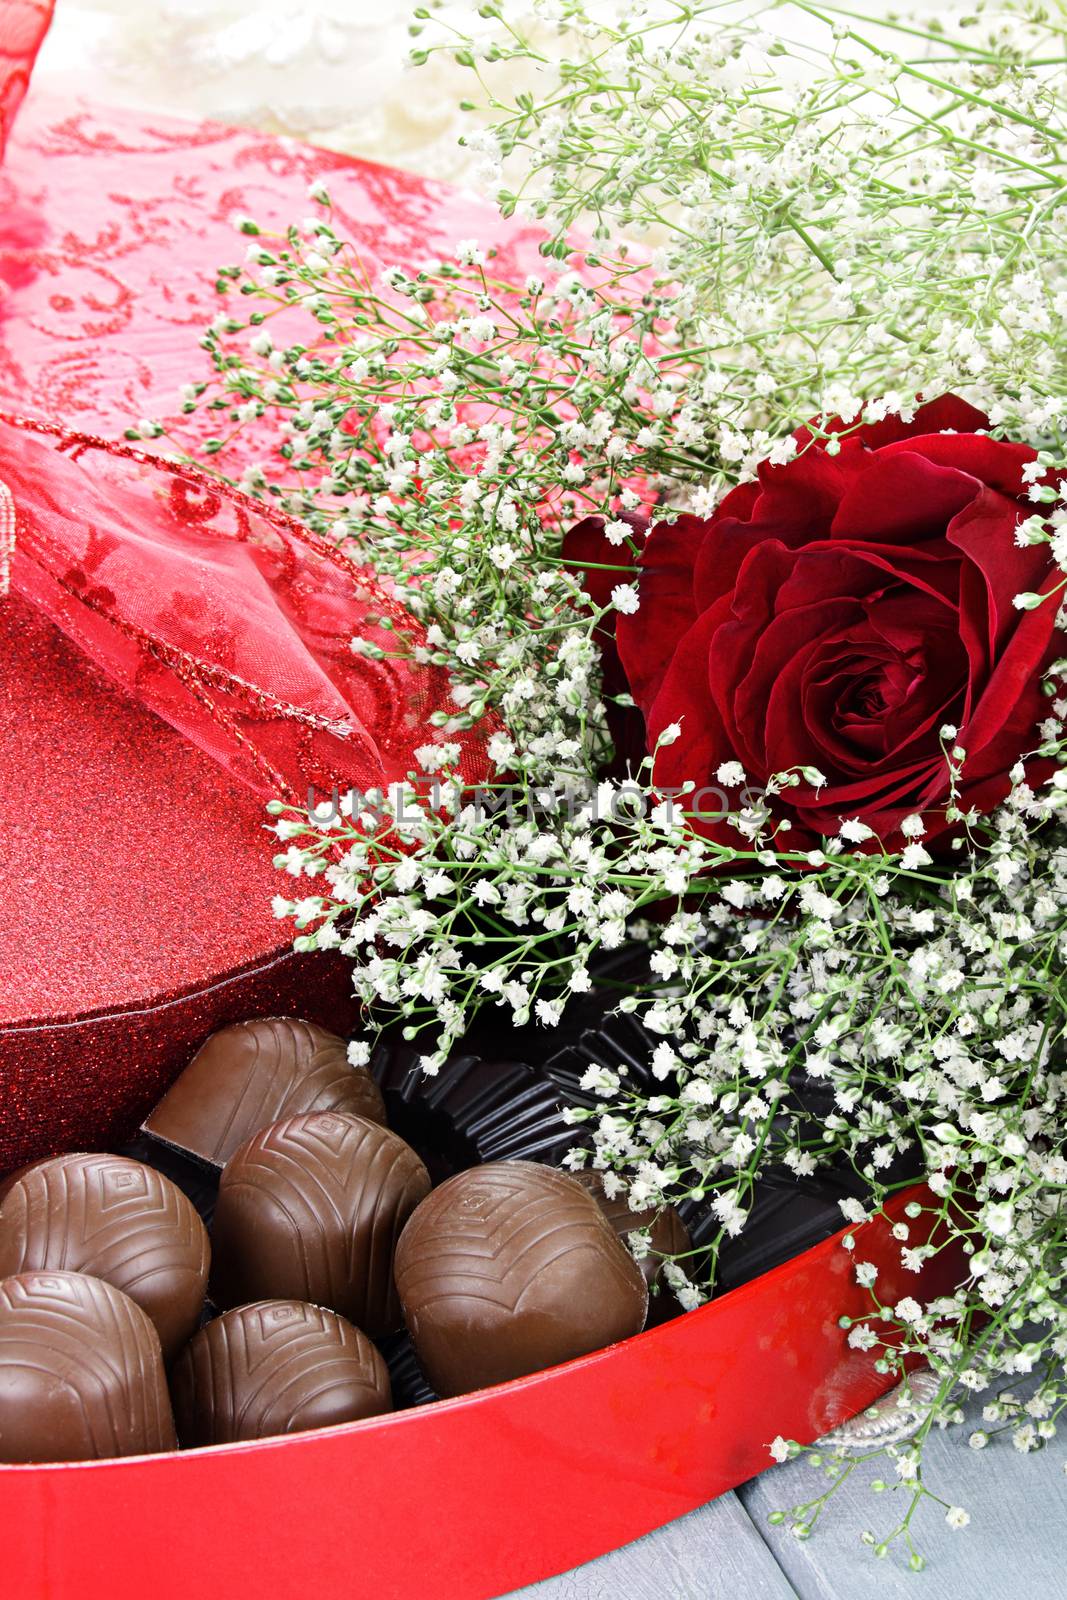 Chocolates and Beauitful Roses by StephanieFrey